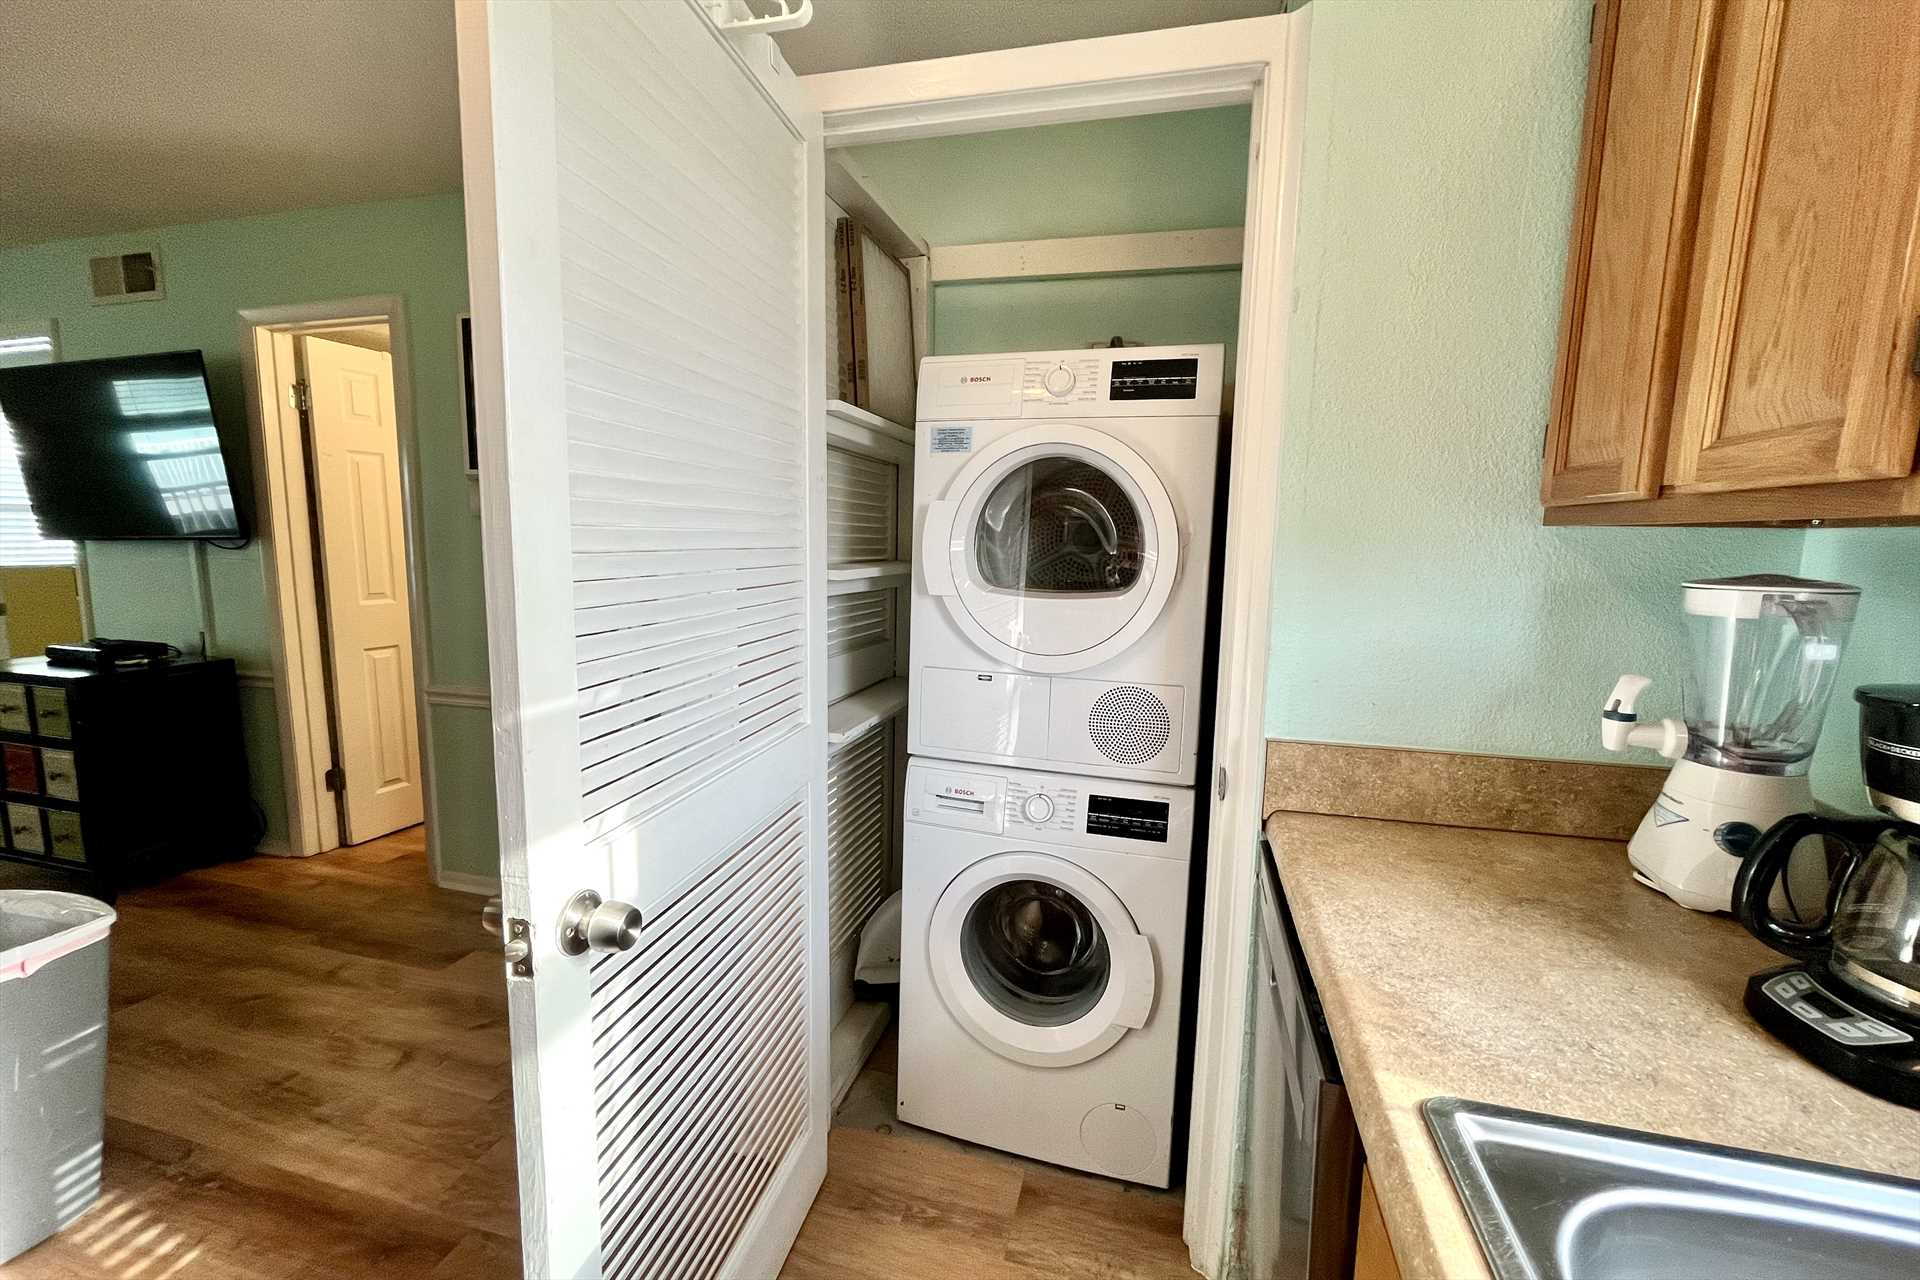 New HE Bosch Washer/Dryer stack